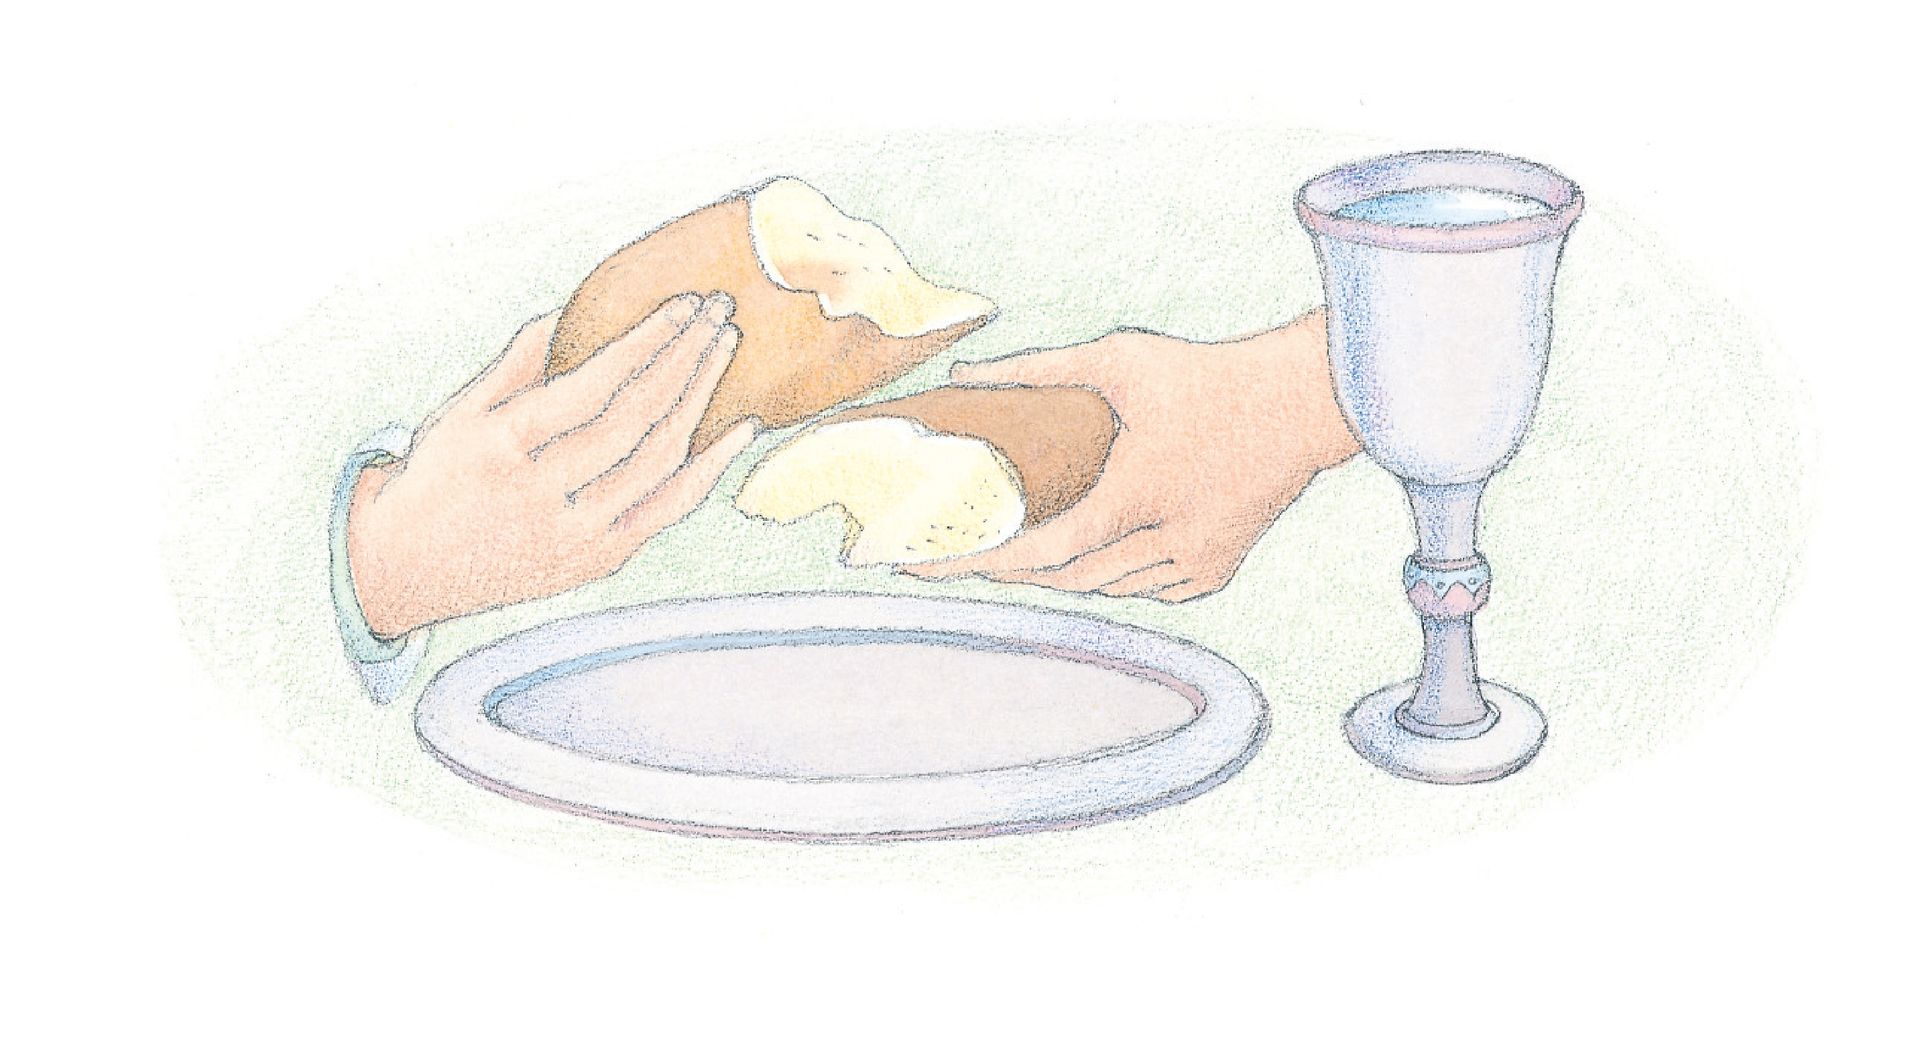 Hands breaking bread at a table. From the Children’s Songbook, page 72, “The Sacrament”; watercolor illustration by Phyllis Luch.